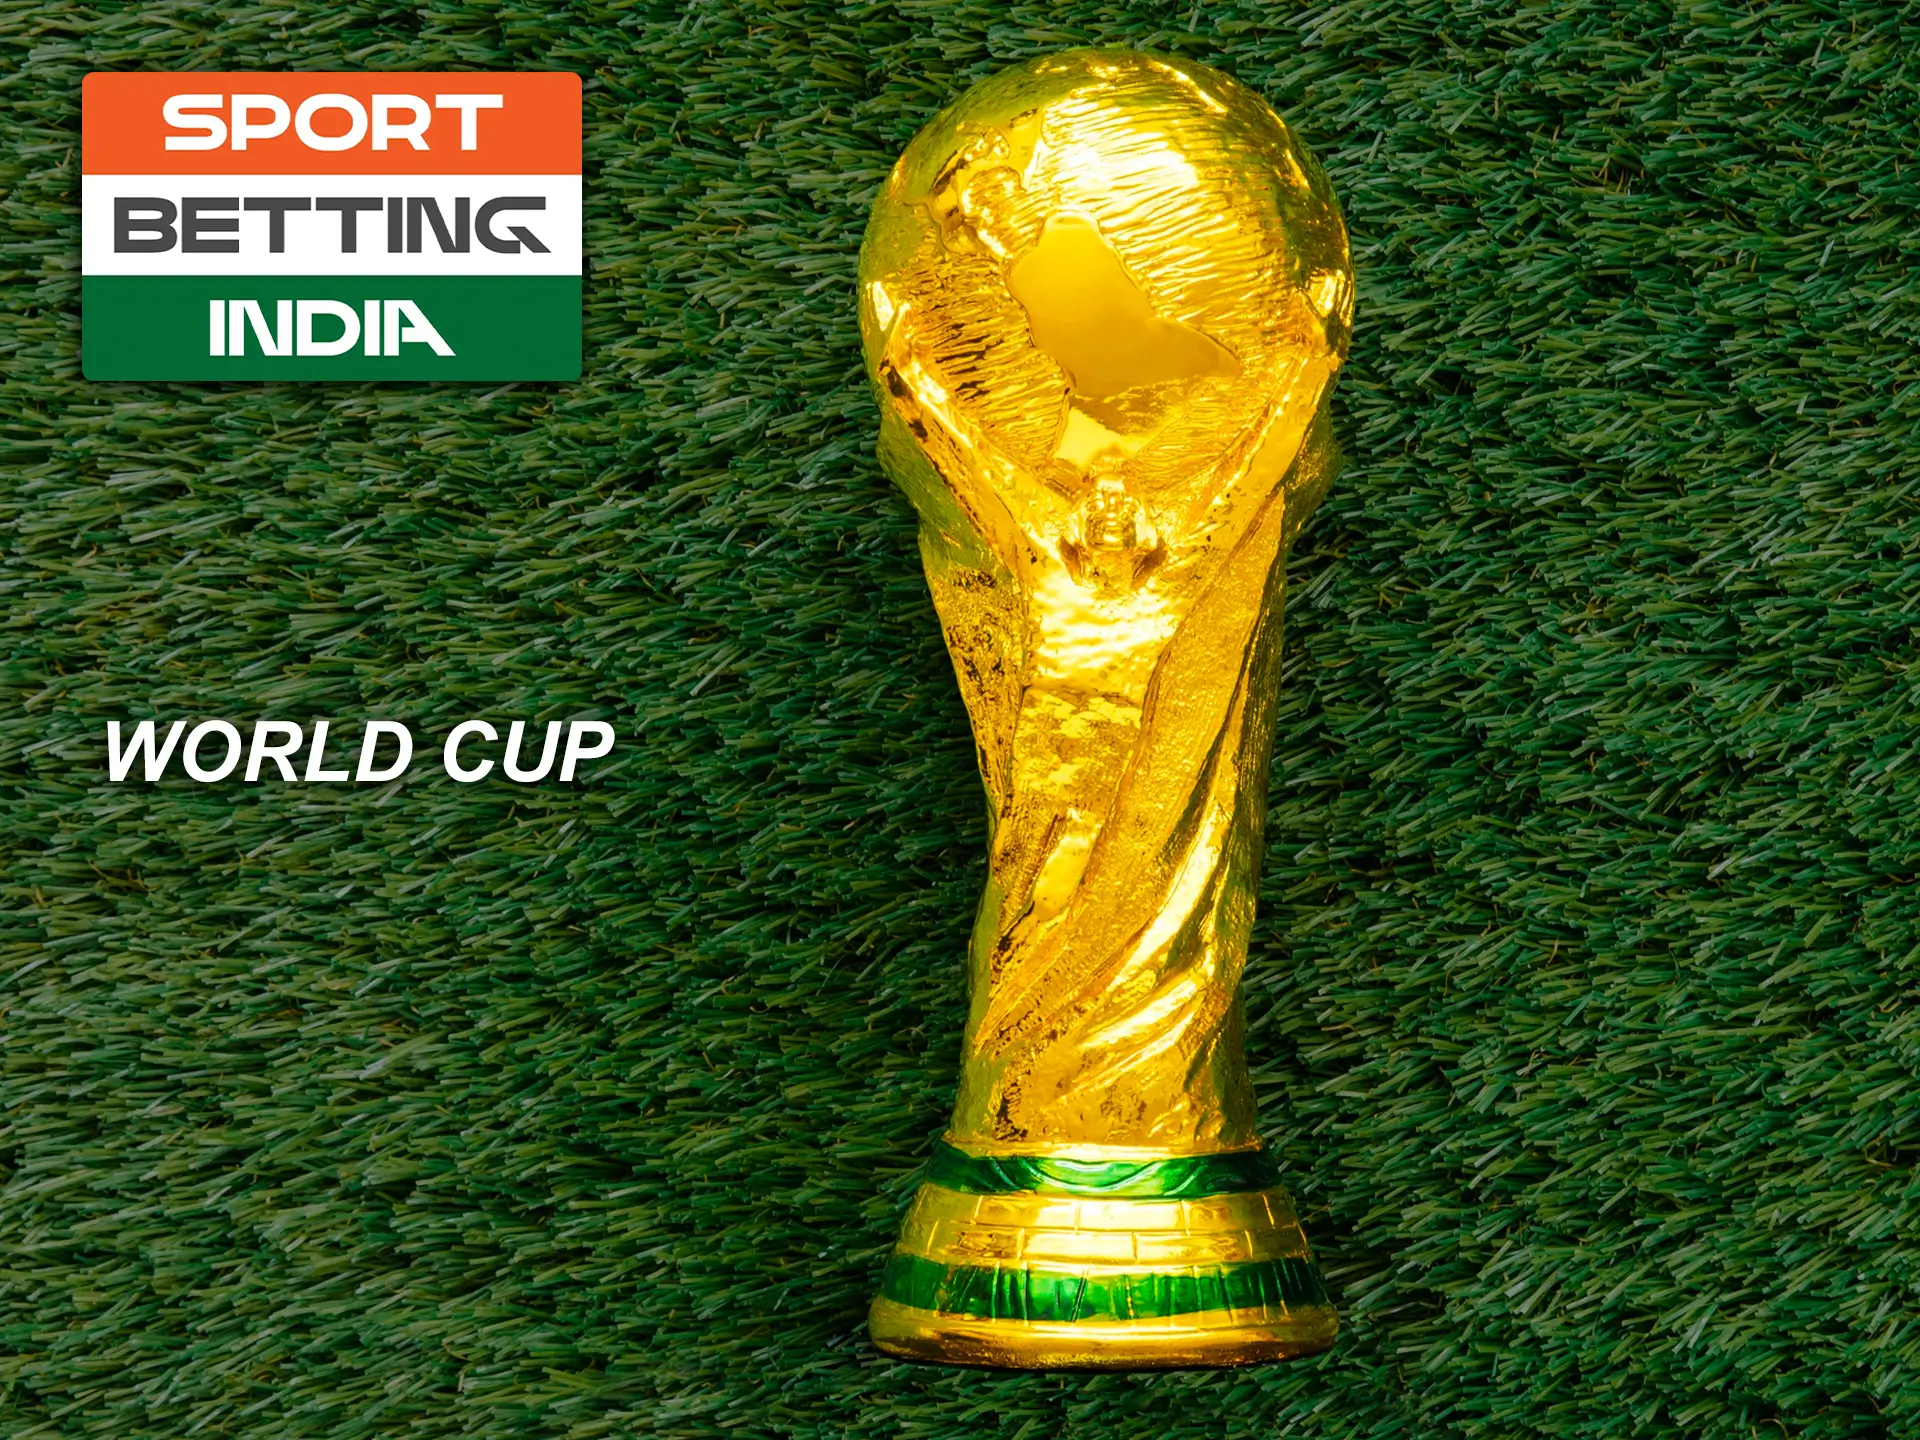 World cup is the most prestigious and popular tournament for all players representing their national football team.